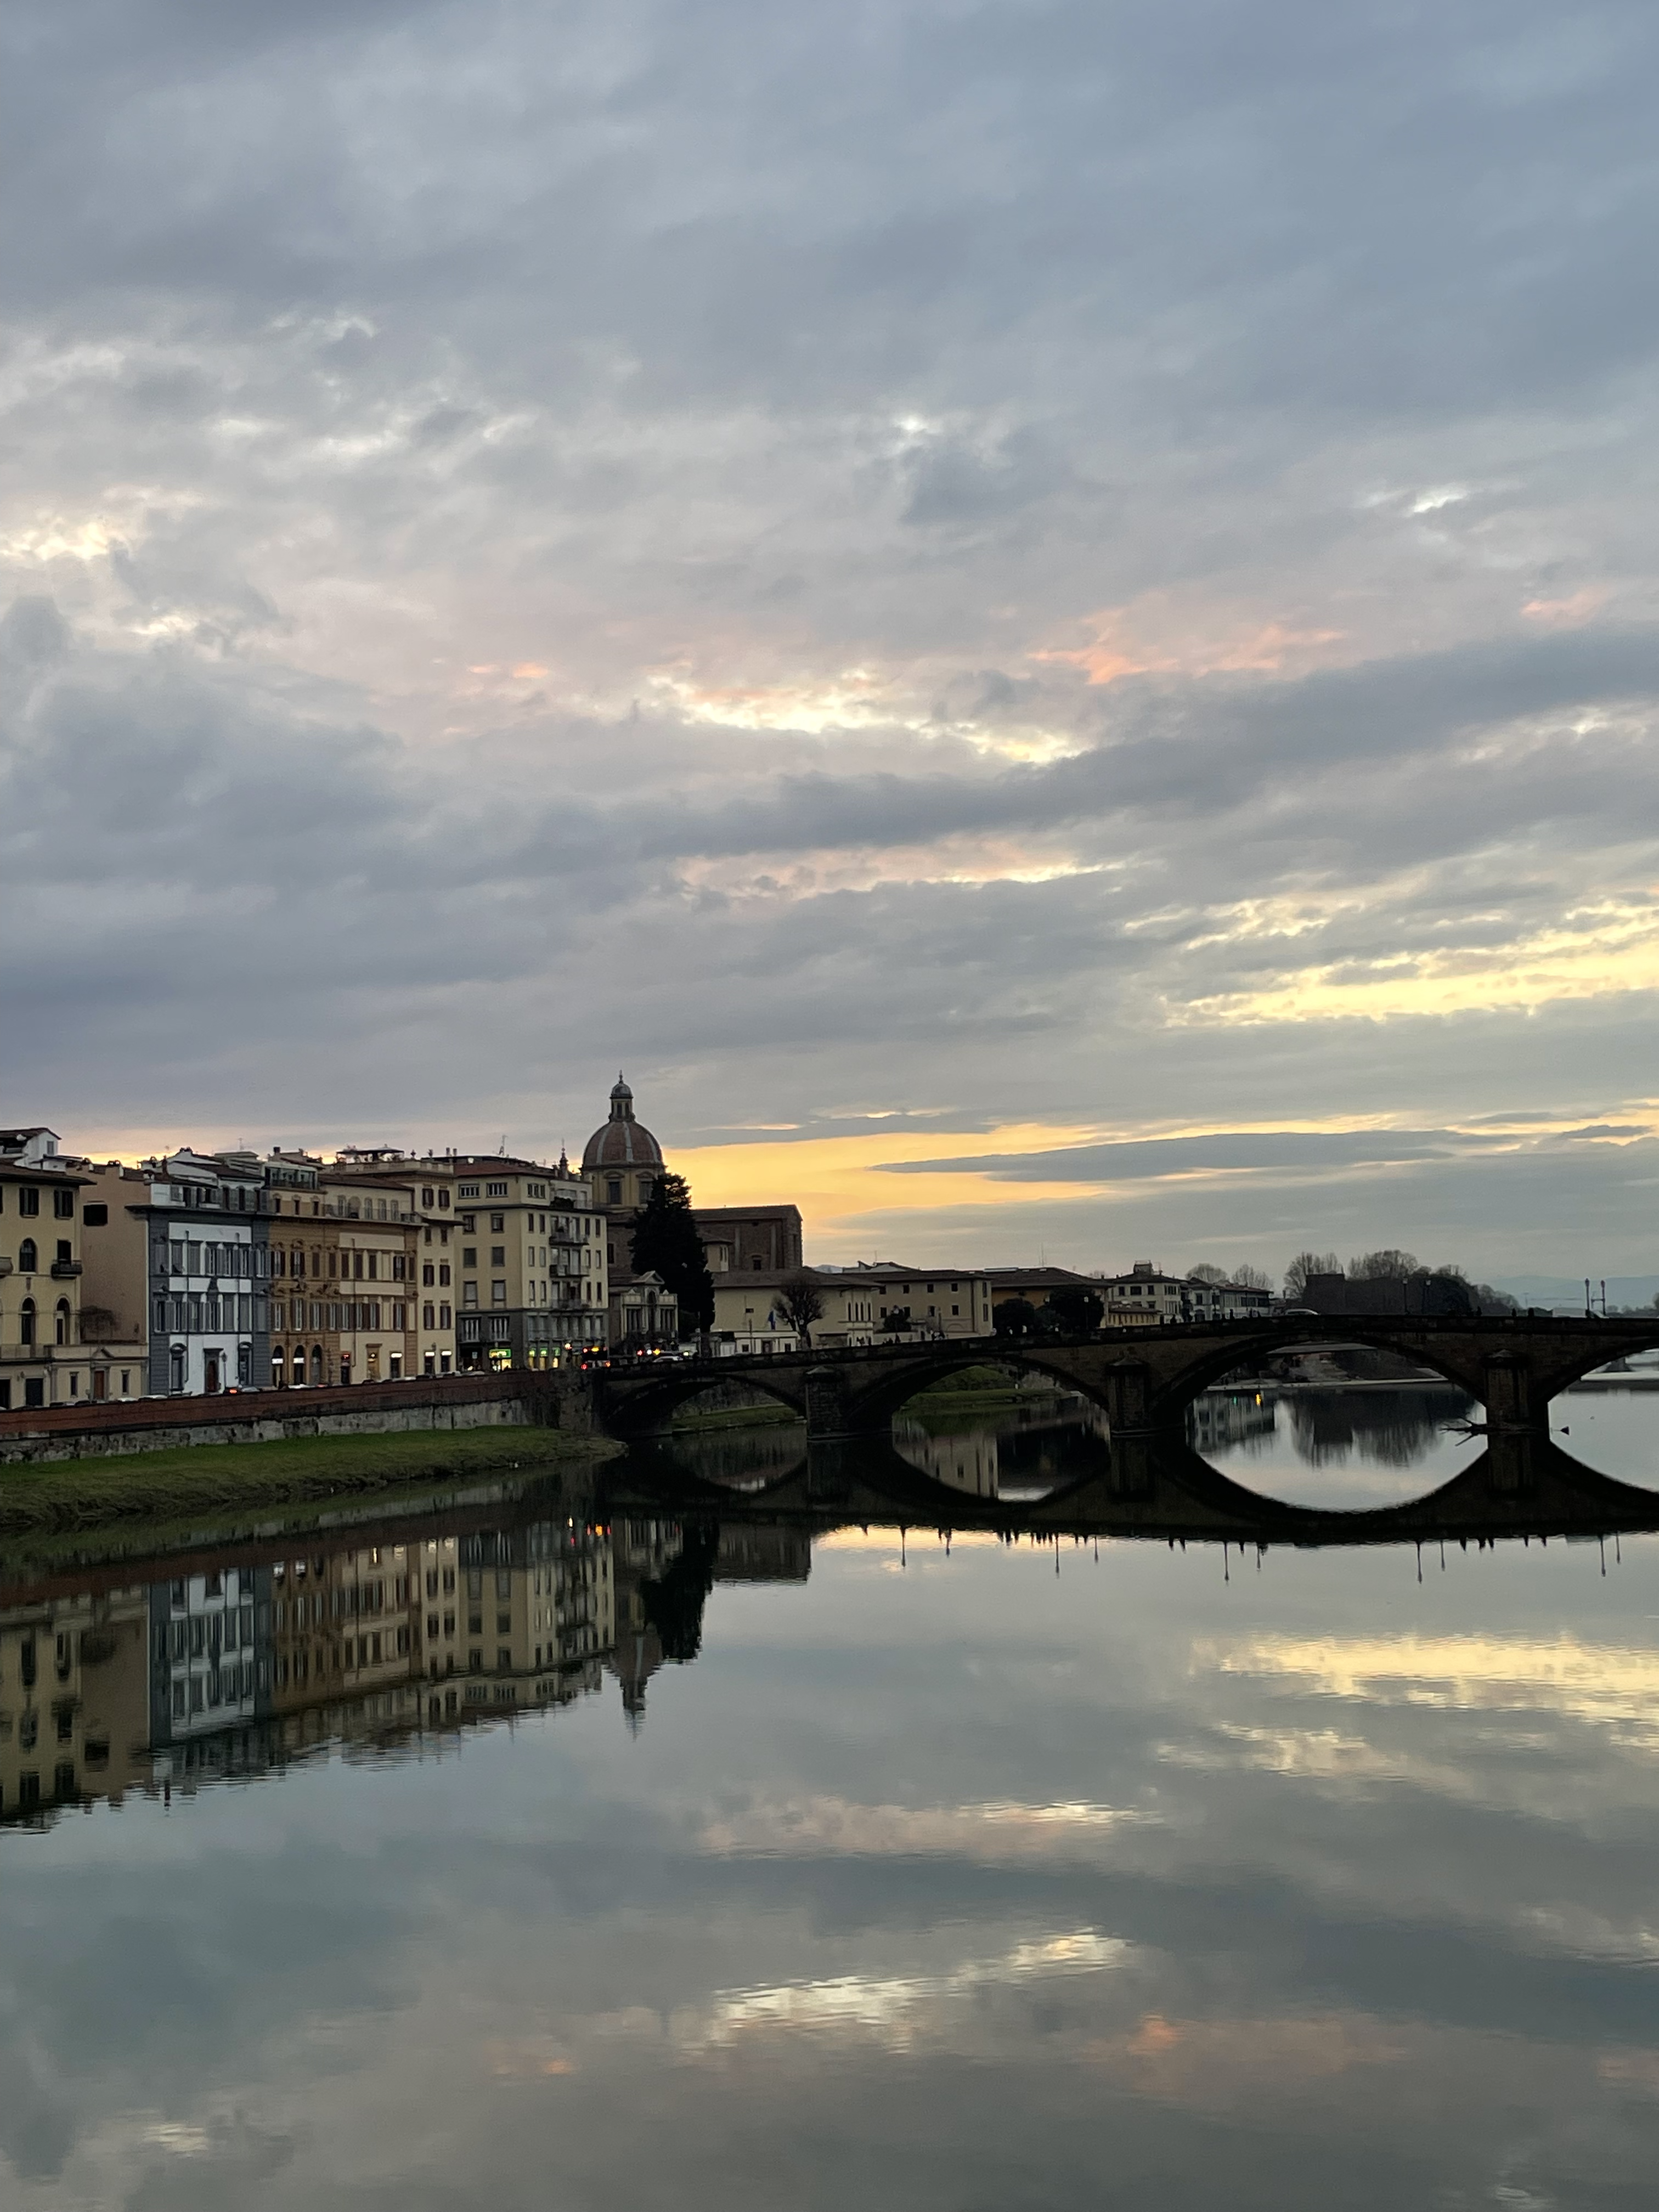 "Sunset over the Arno in Florence" by Shayna Martin